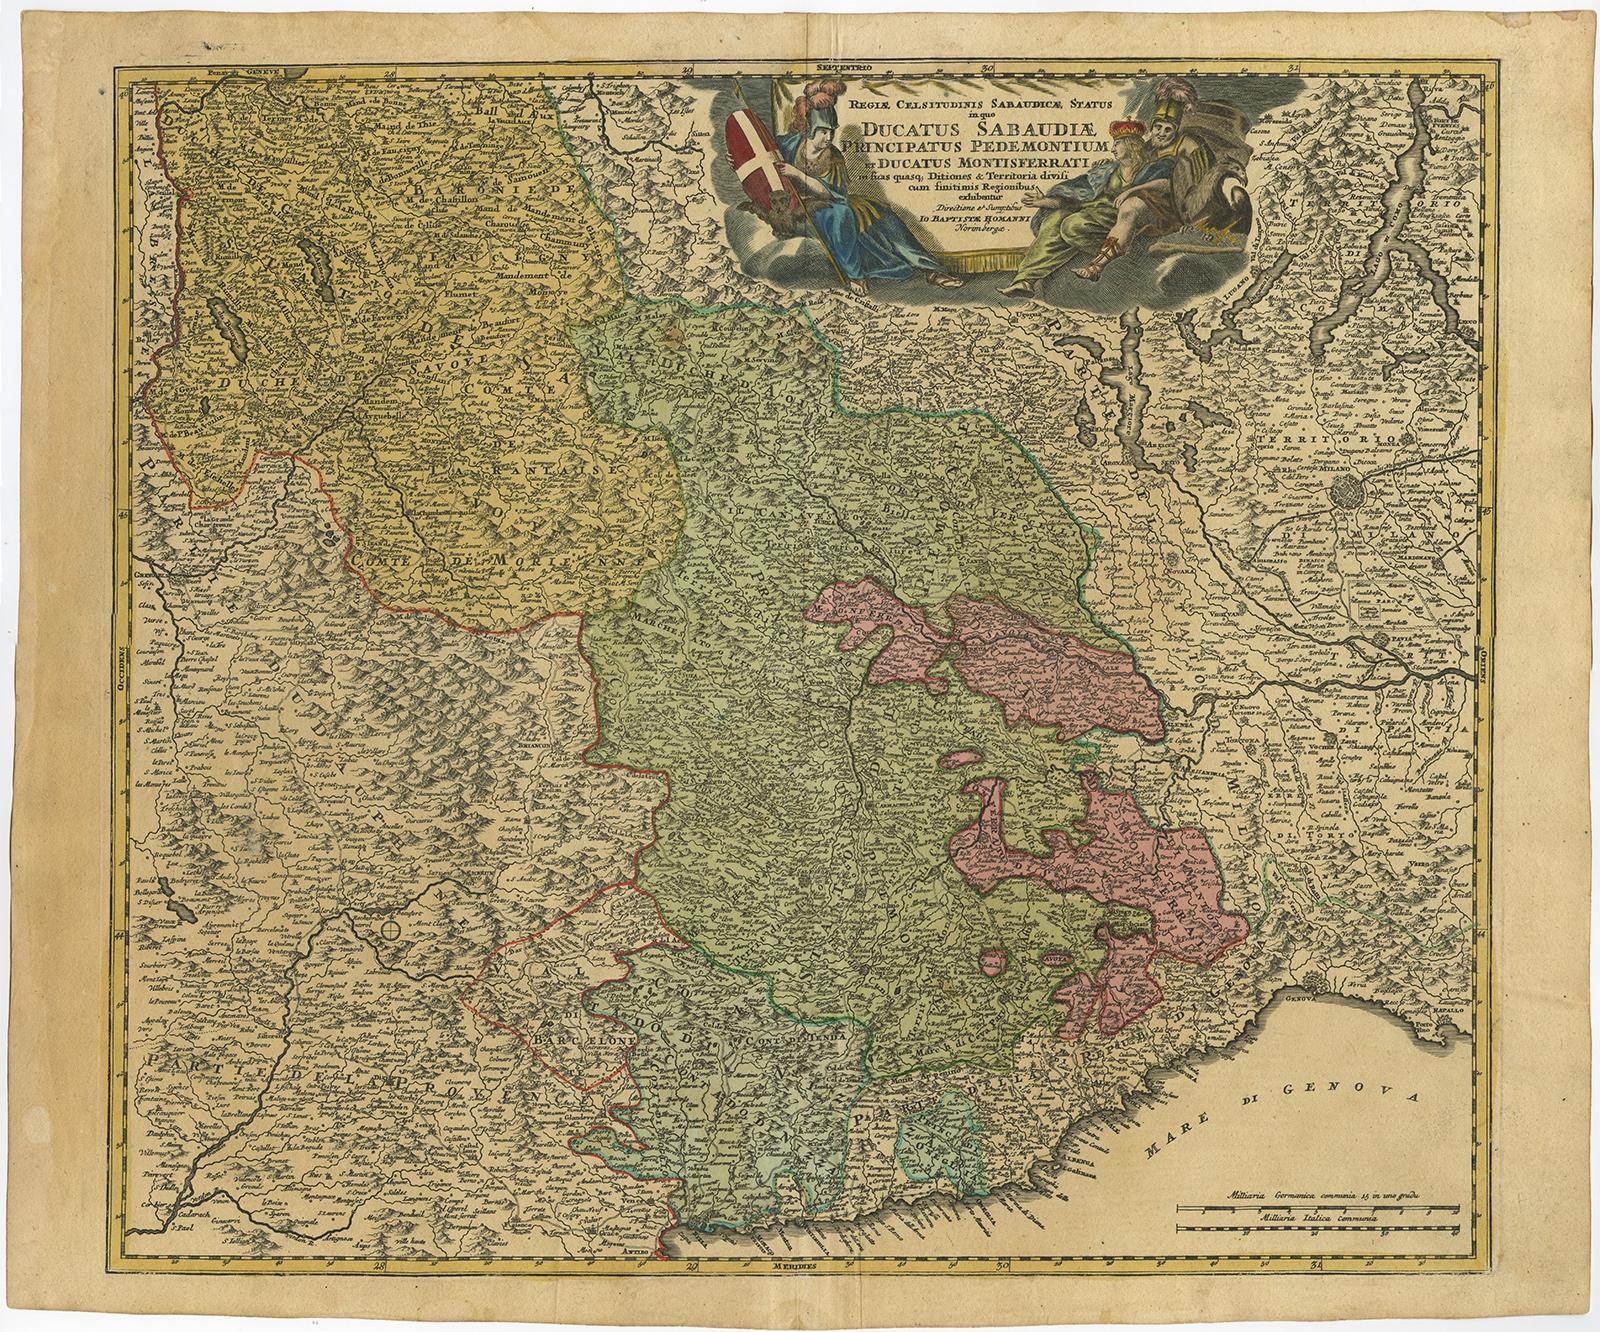 Antique map titled 'Ducatus Sabaudiae, Principatus Pedemontium et ducatis Montisferrati (..).' 

Map of the Savoy and Piedmont regions, centered on Torino. The map coverage extends from Grenoble, Geneva, Die and Romans, to Genoa and Milan. Highly